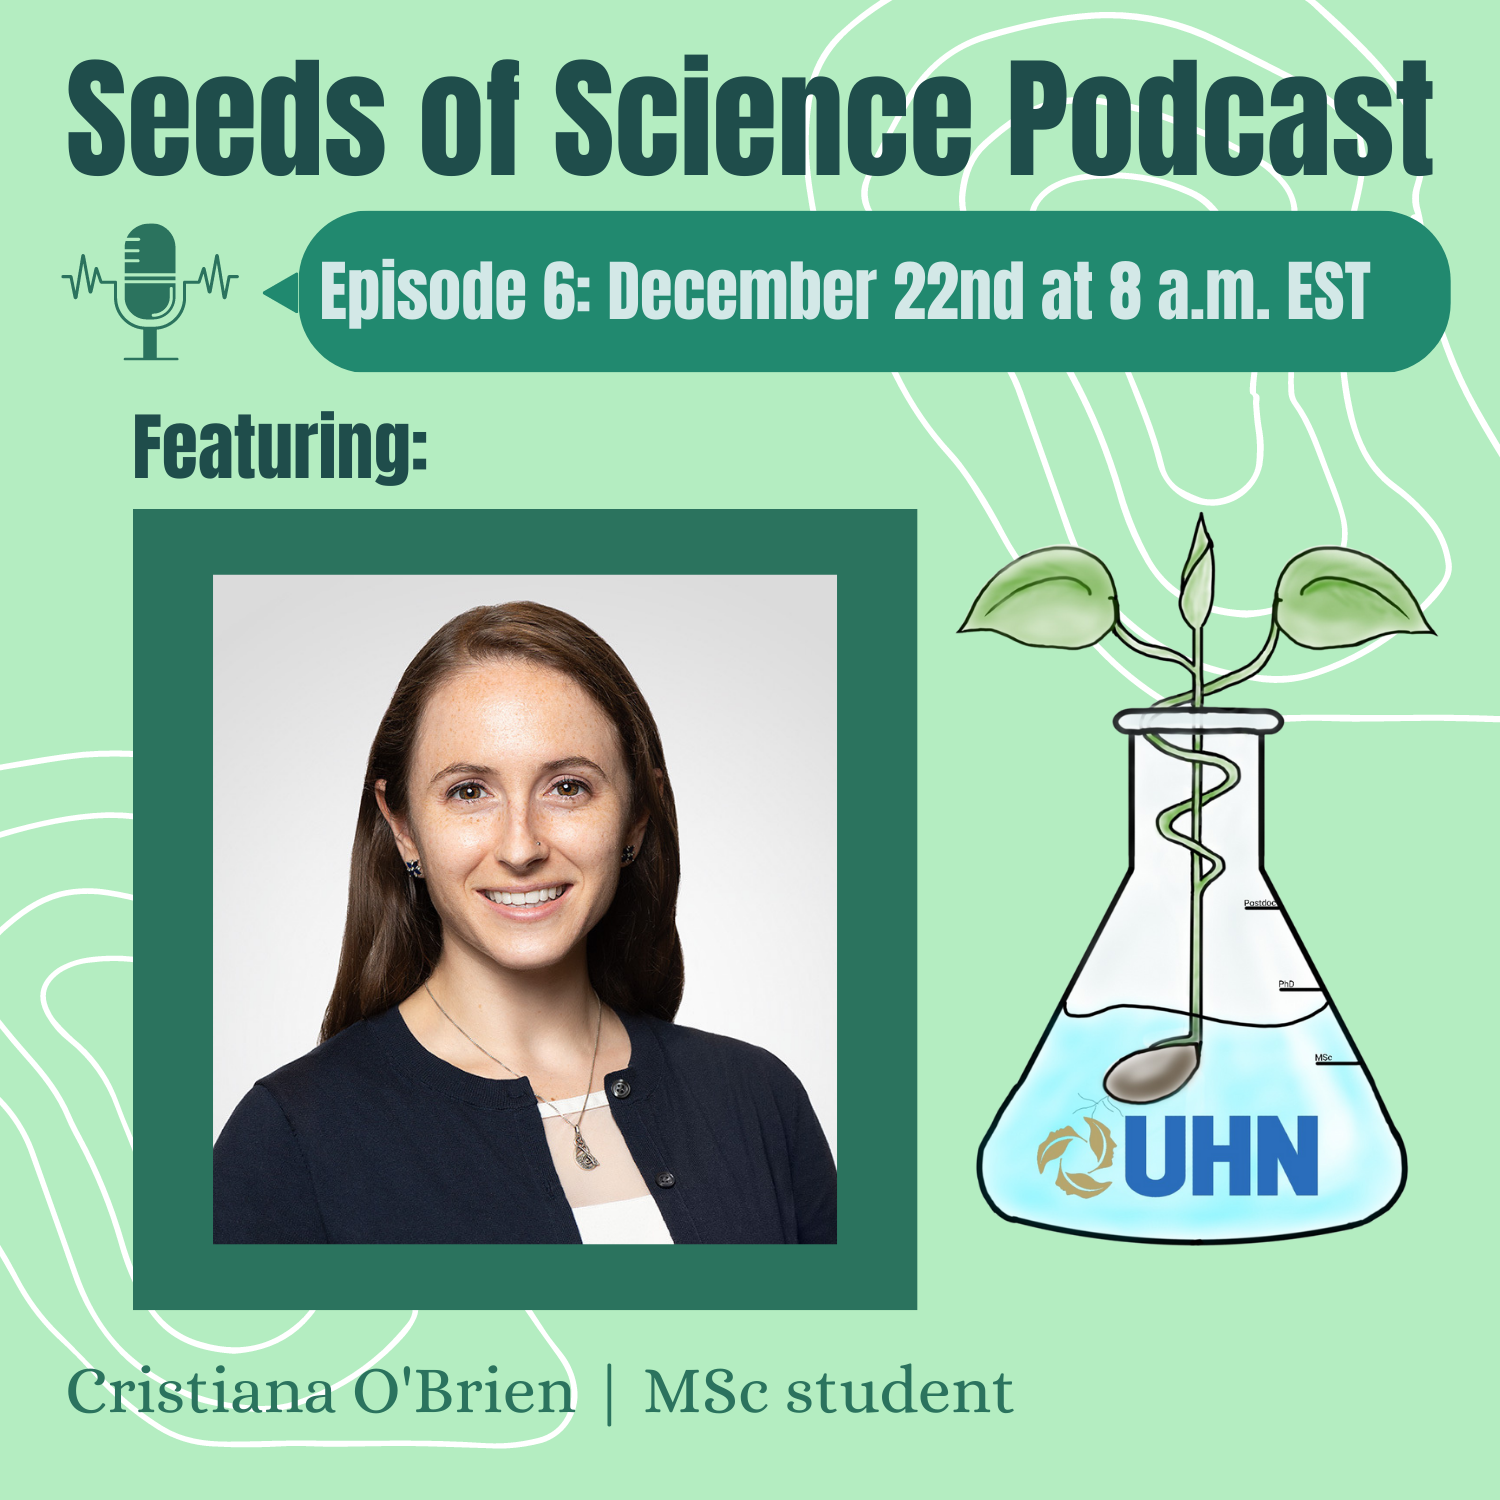 Seeds of Science Podcast poster. Episode 6: December 22nd at 8 am EST. Cristiana O'Brien, MSc student